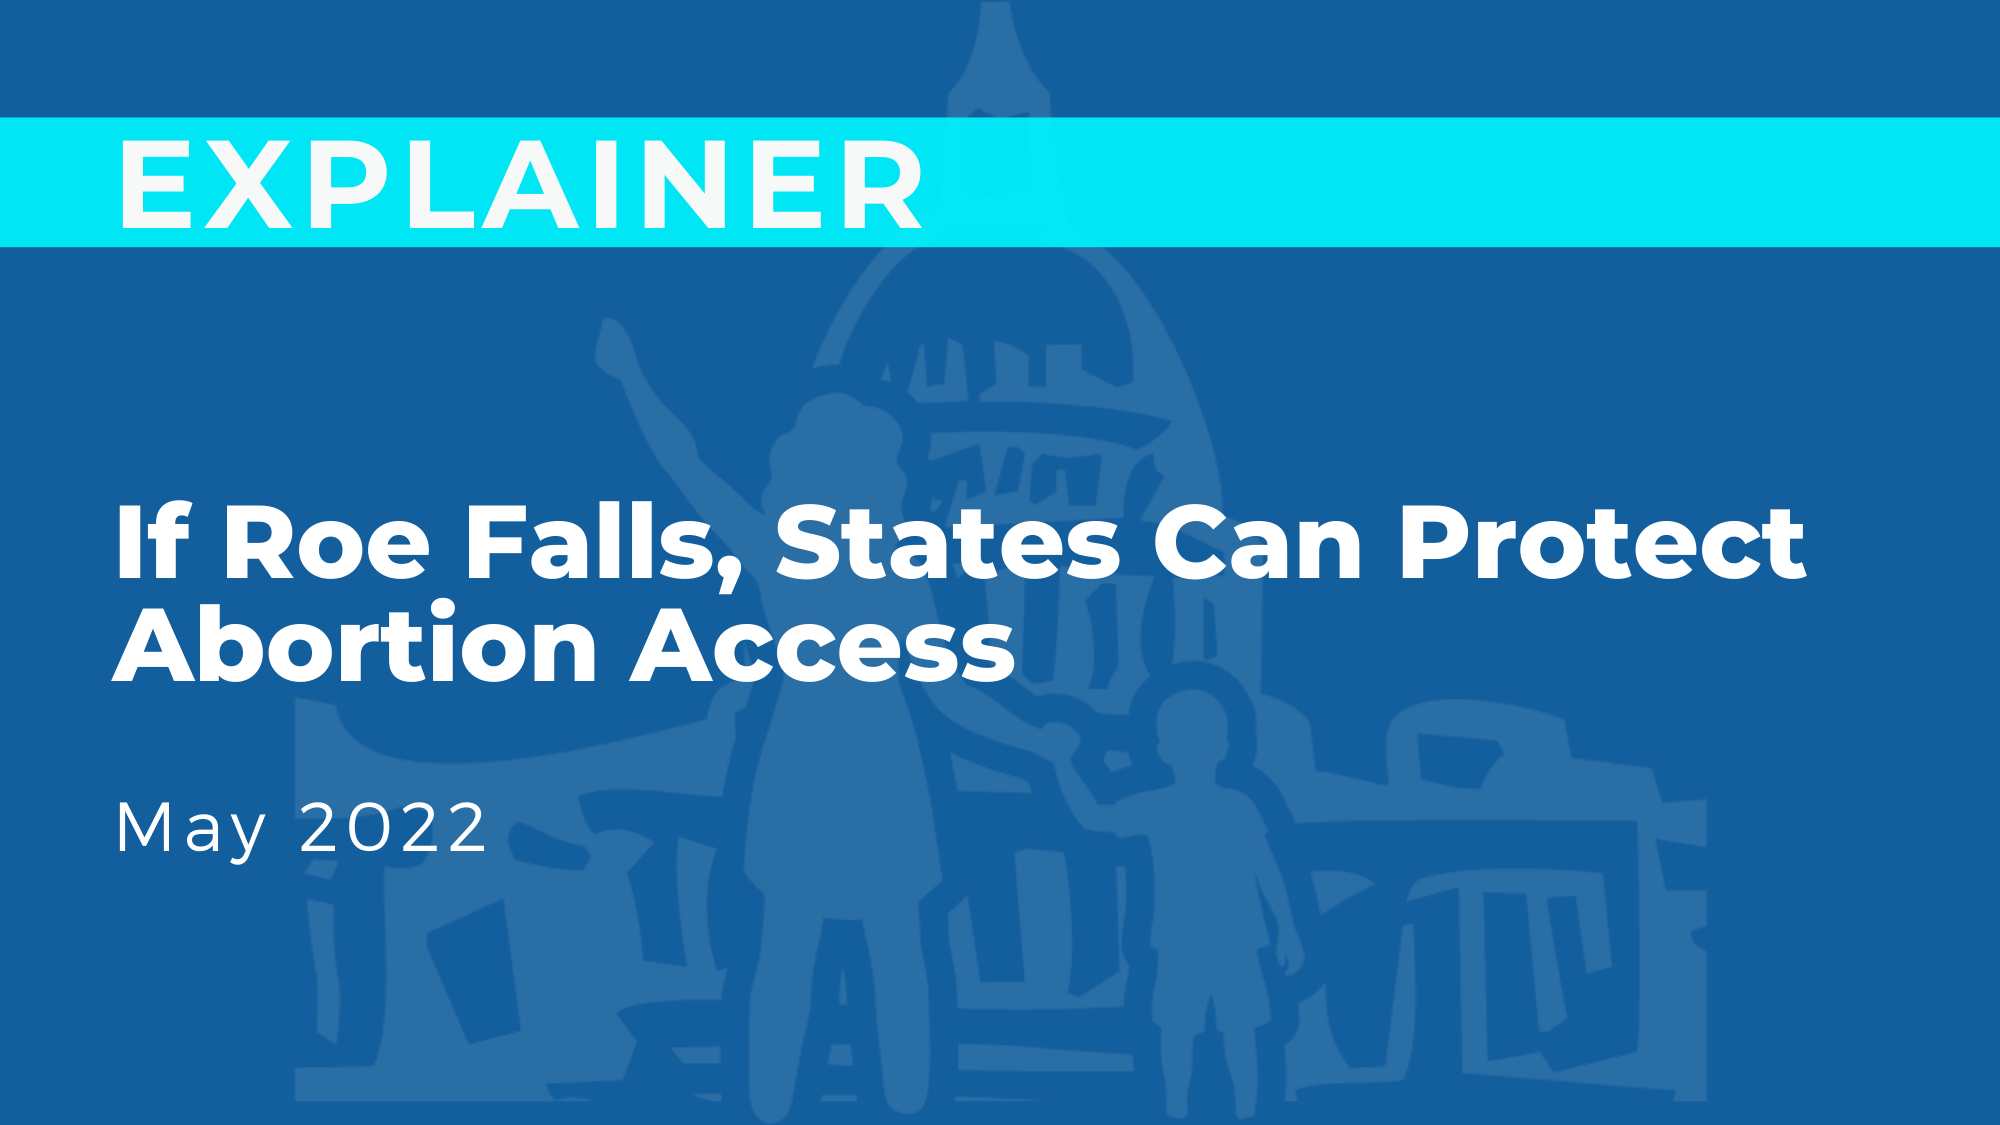 If Roe Falls, States Can Protect Abortion Access